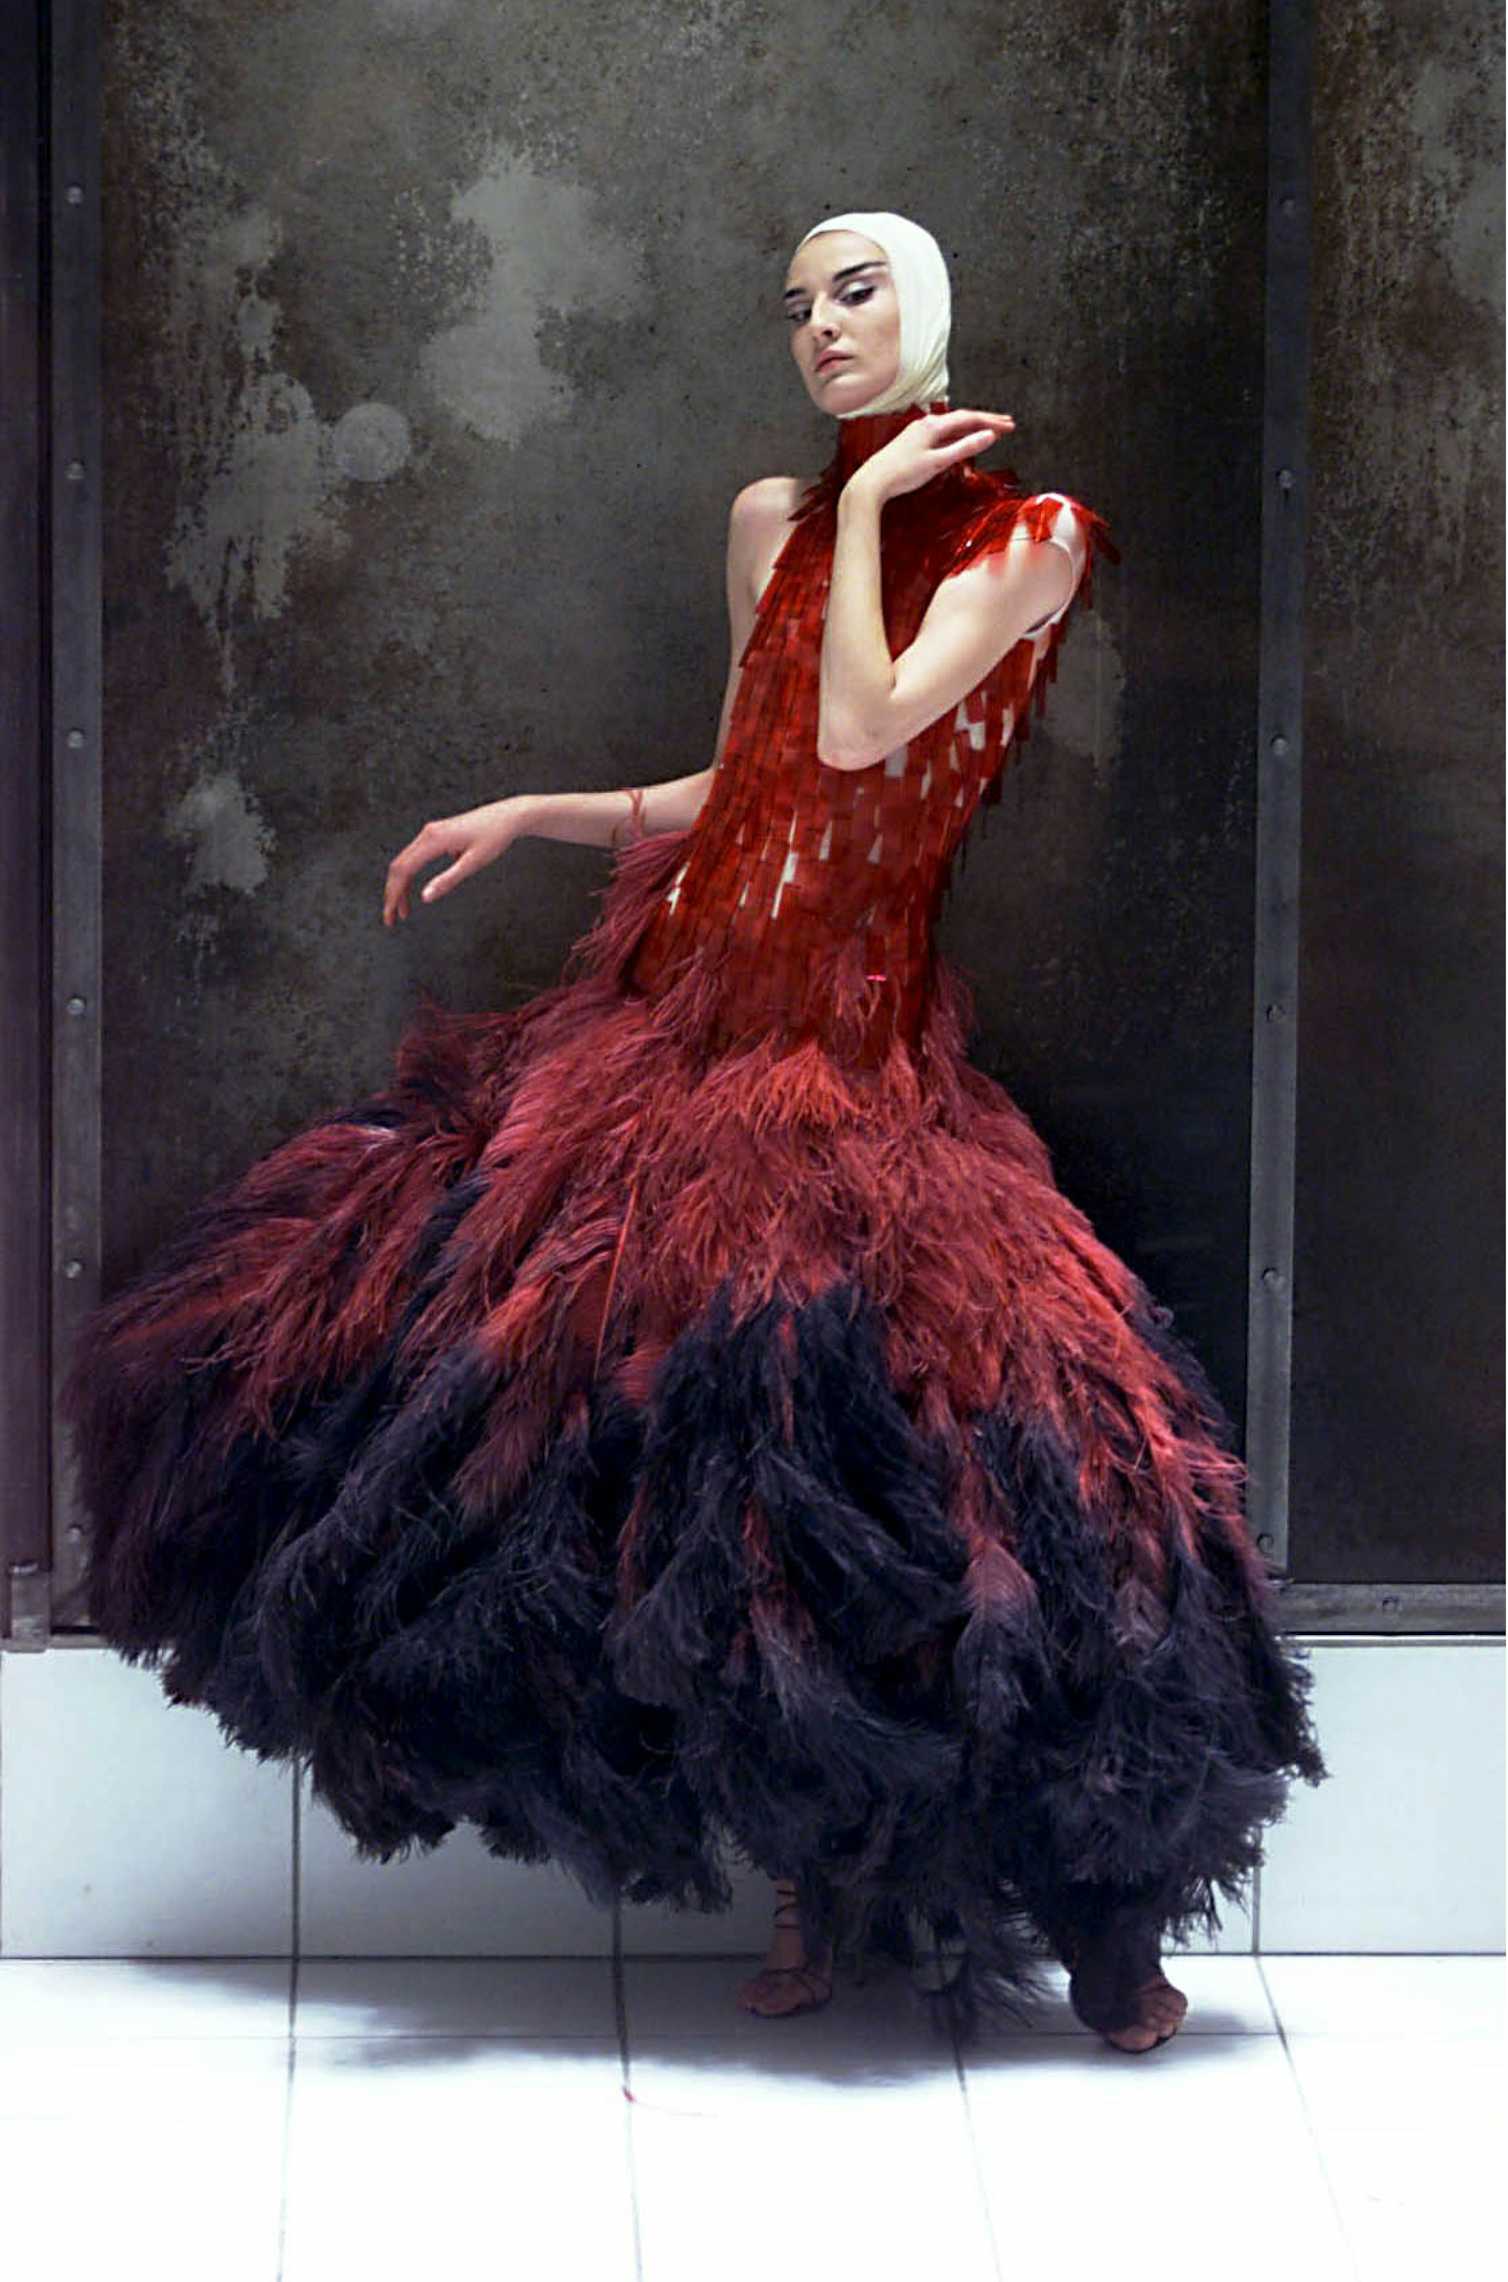 The gothic vision at the heart of Alexander McQueen's savage beauty